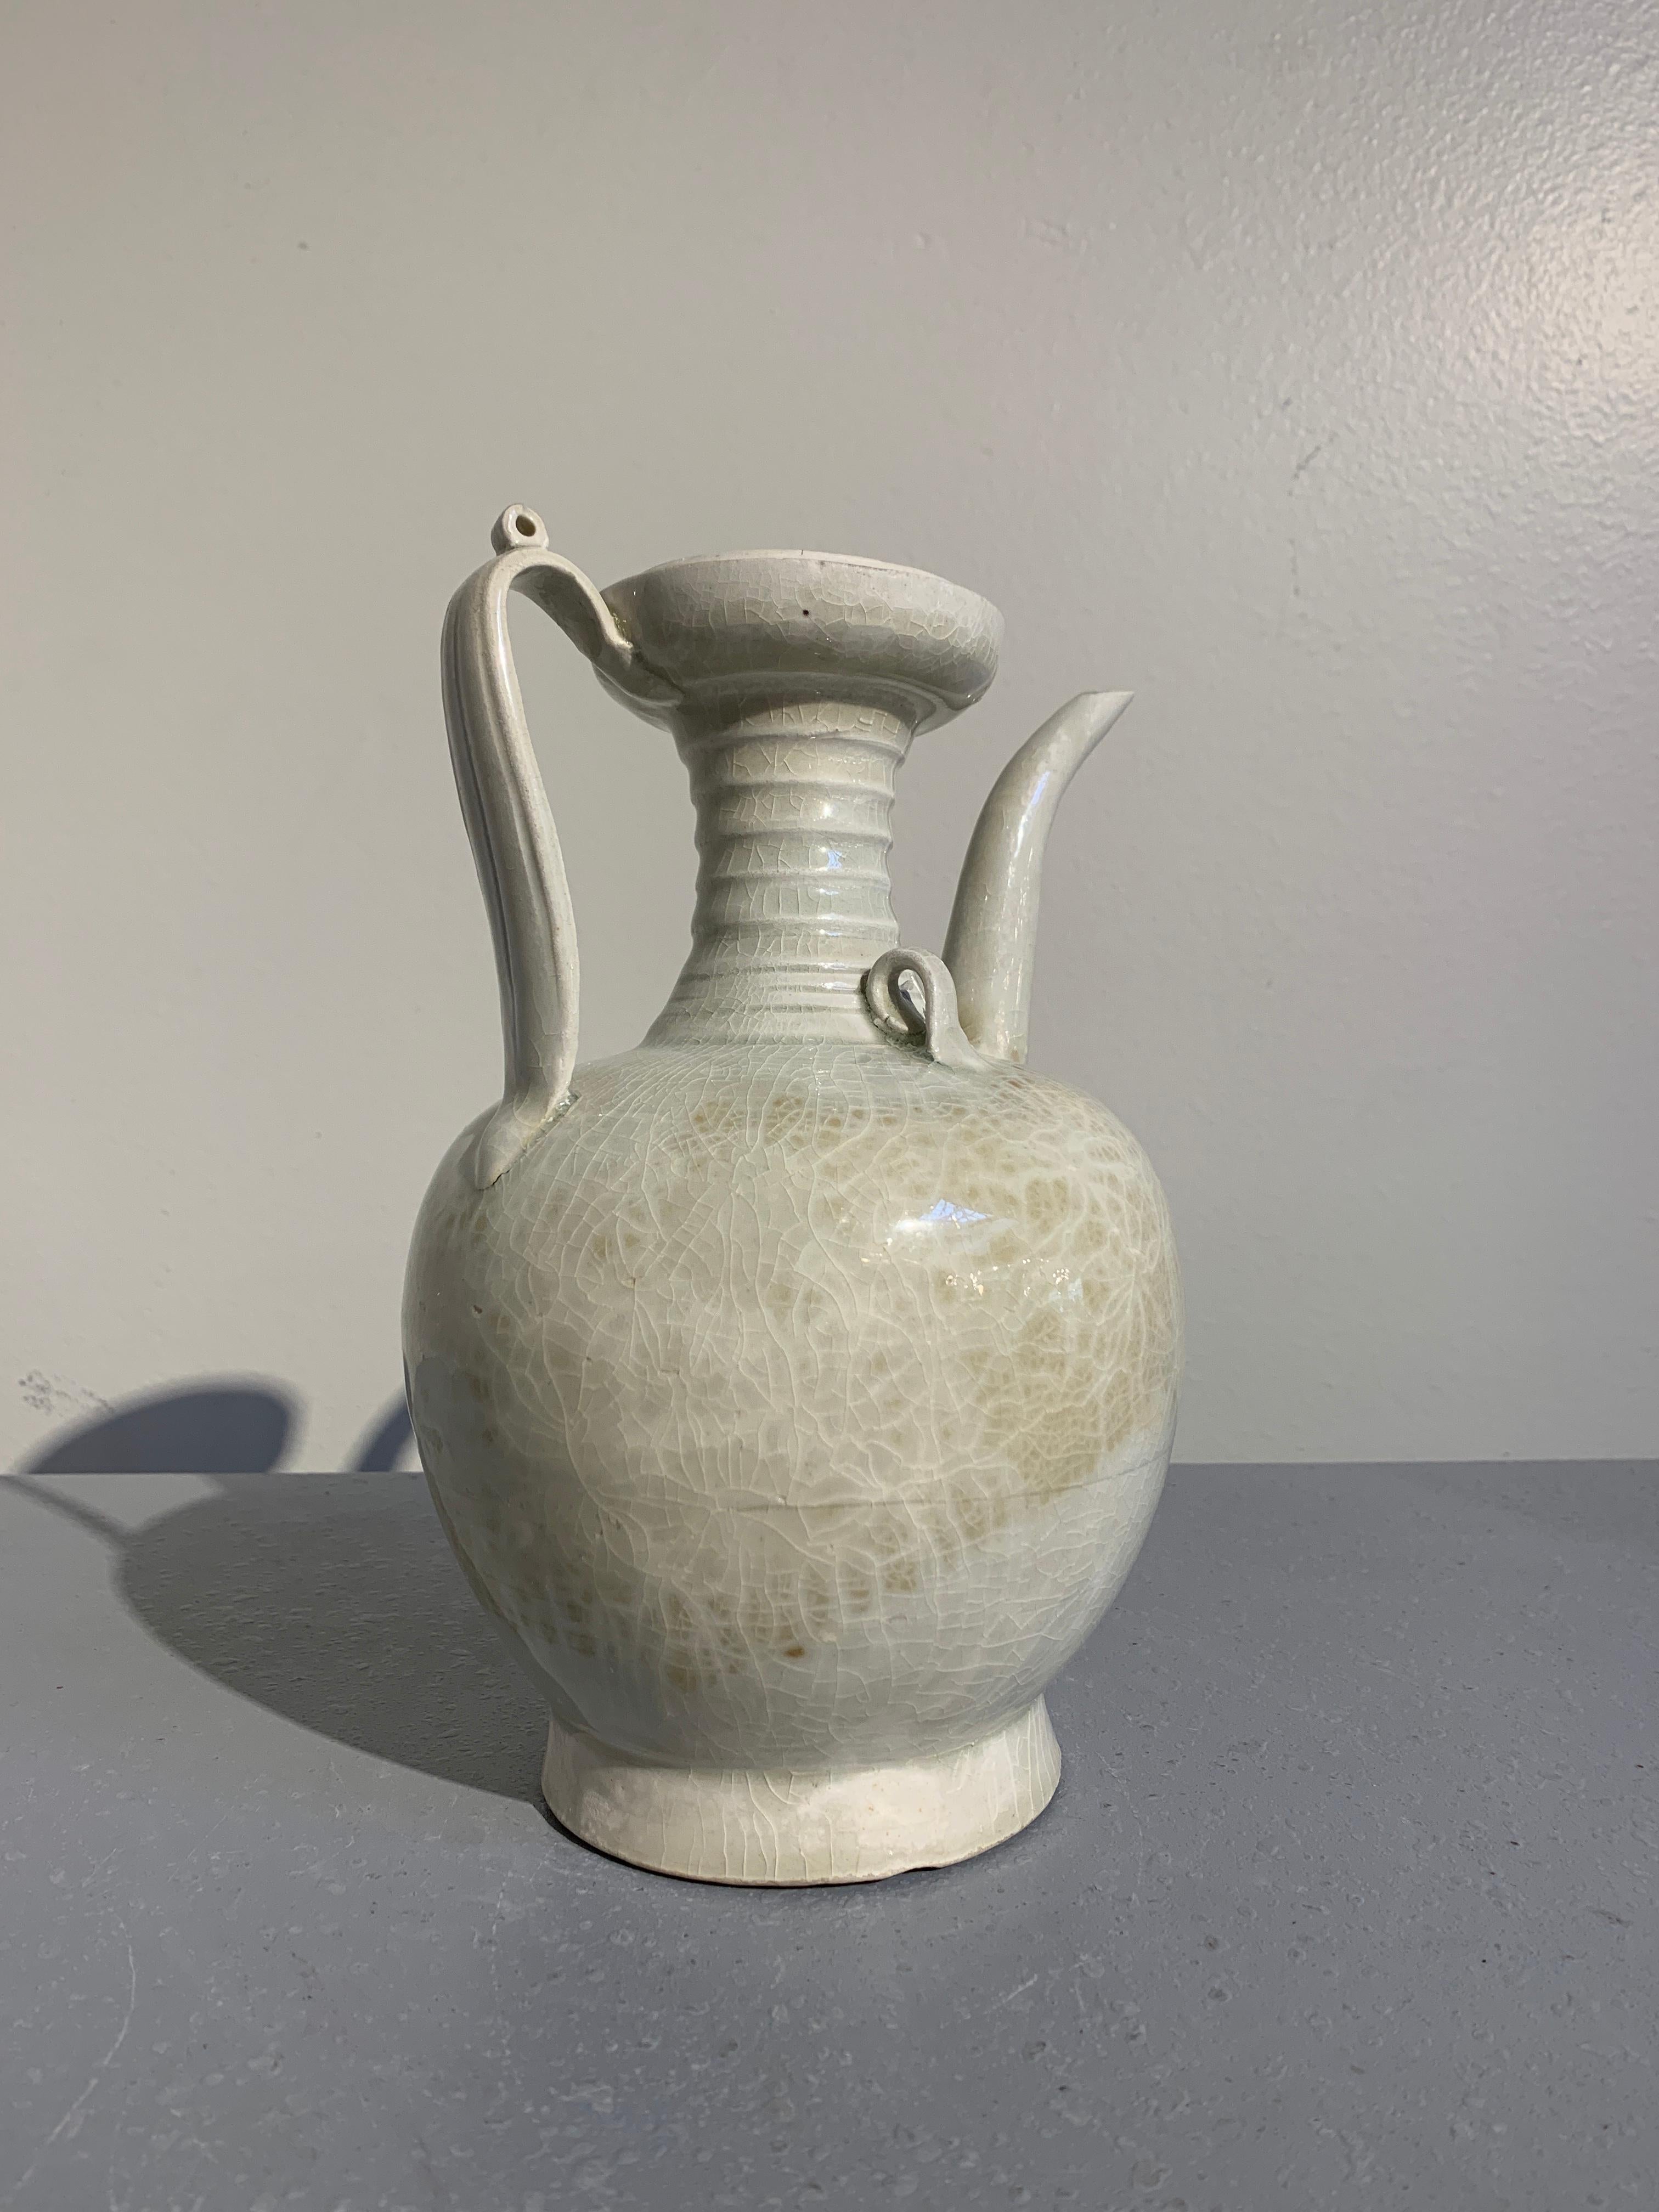 18th Century and Earlier Chinese Qingbai Glazed Ewer, Southern Song Dynasty, 13th Century